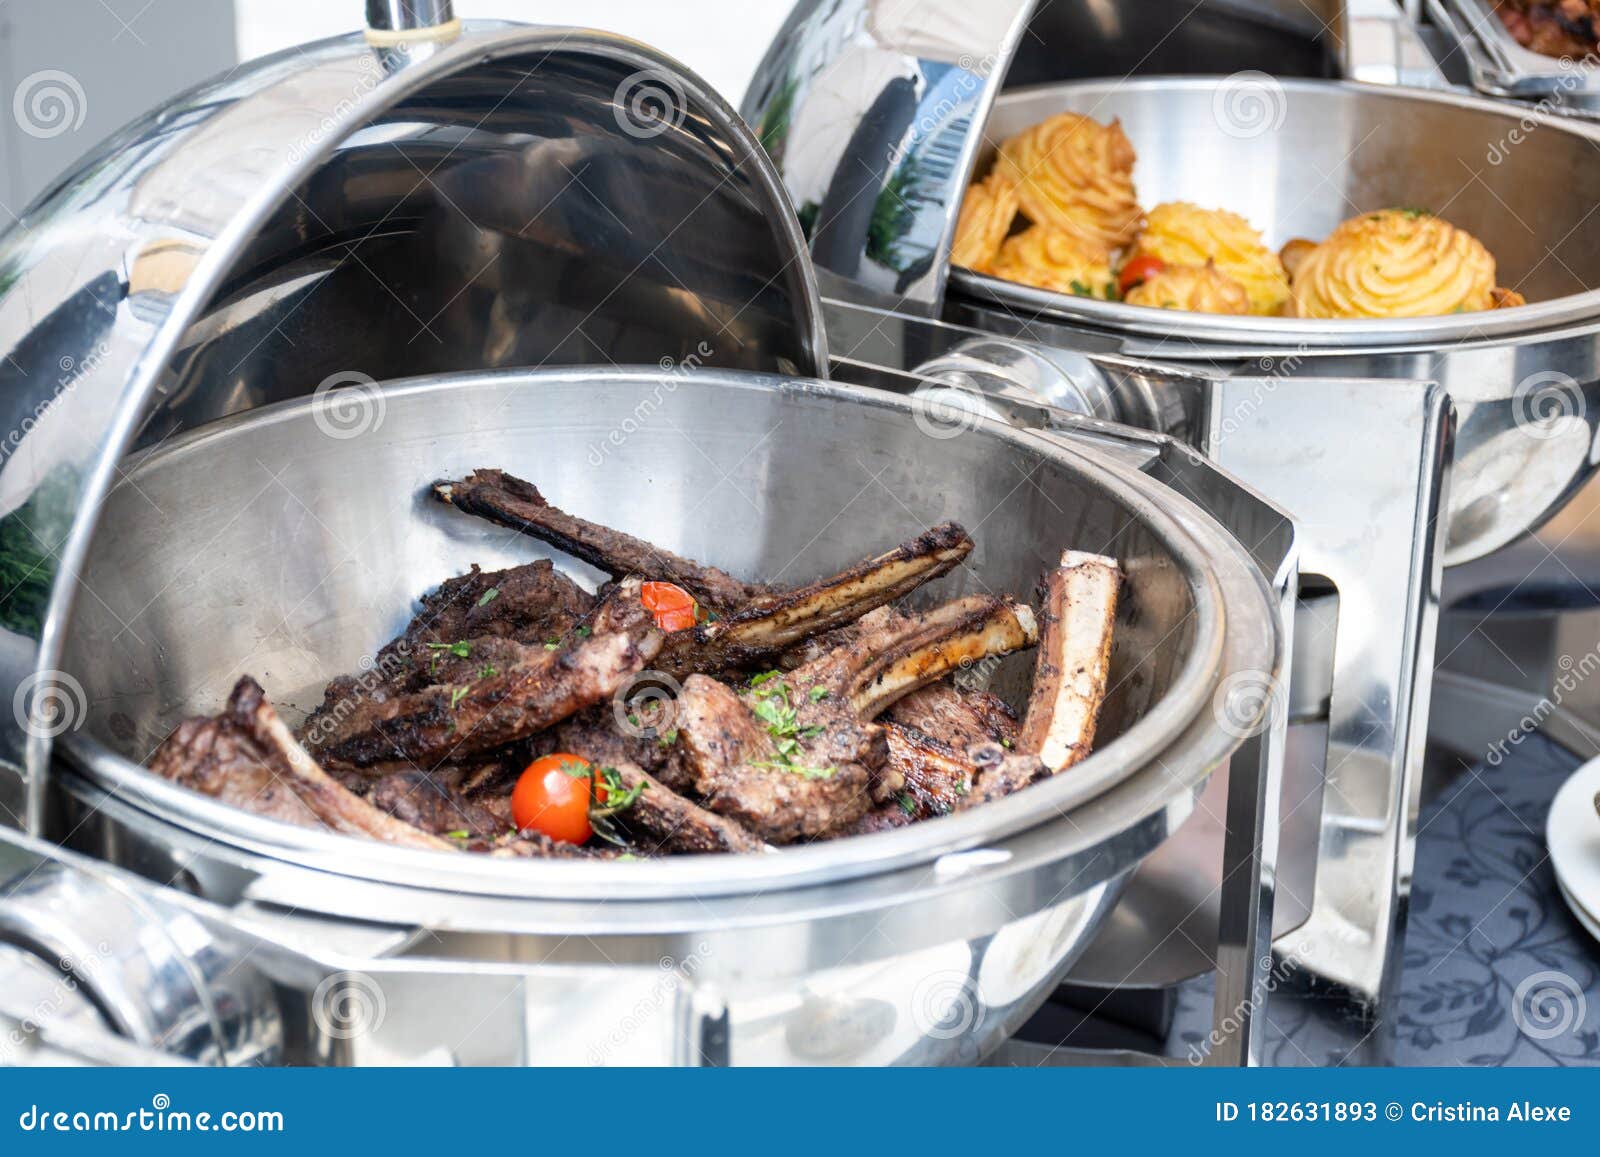 https://thumbs.dreamstime.com/z/live-food-stations-kitchenware-line-catering-summer-brunch-buffet-corporate-cocktail-event-luxury-hotel-outdoor-outside-182631893.jpg